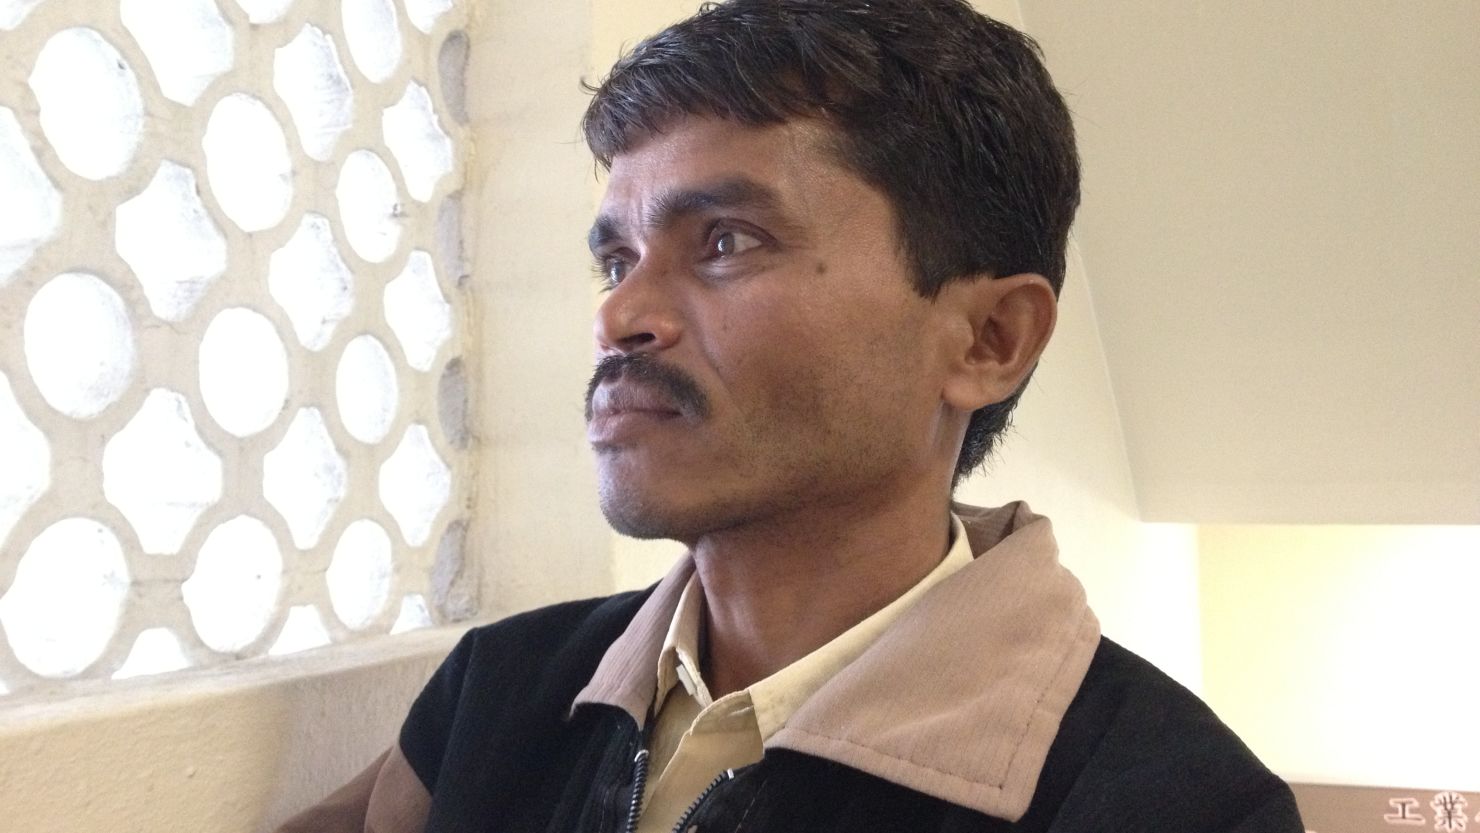 Ramesh Makwana suffers from silicosis, a respiratory disease brought on by 14 years of work in an agate factory in India.